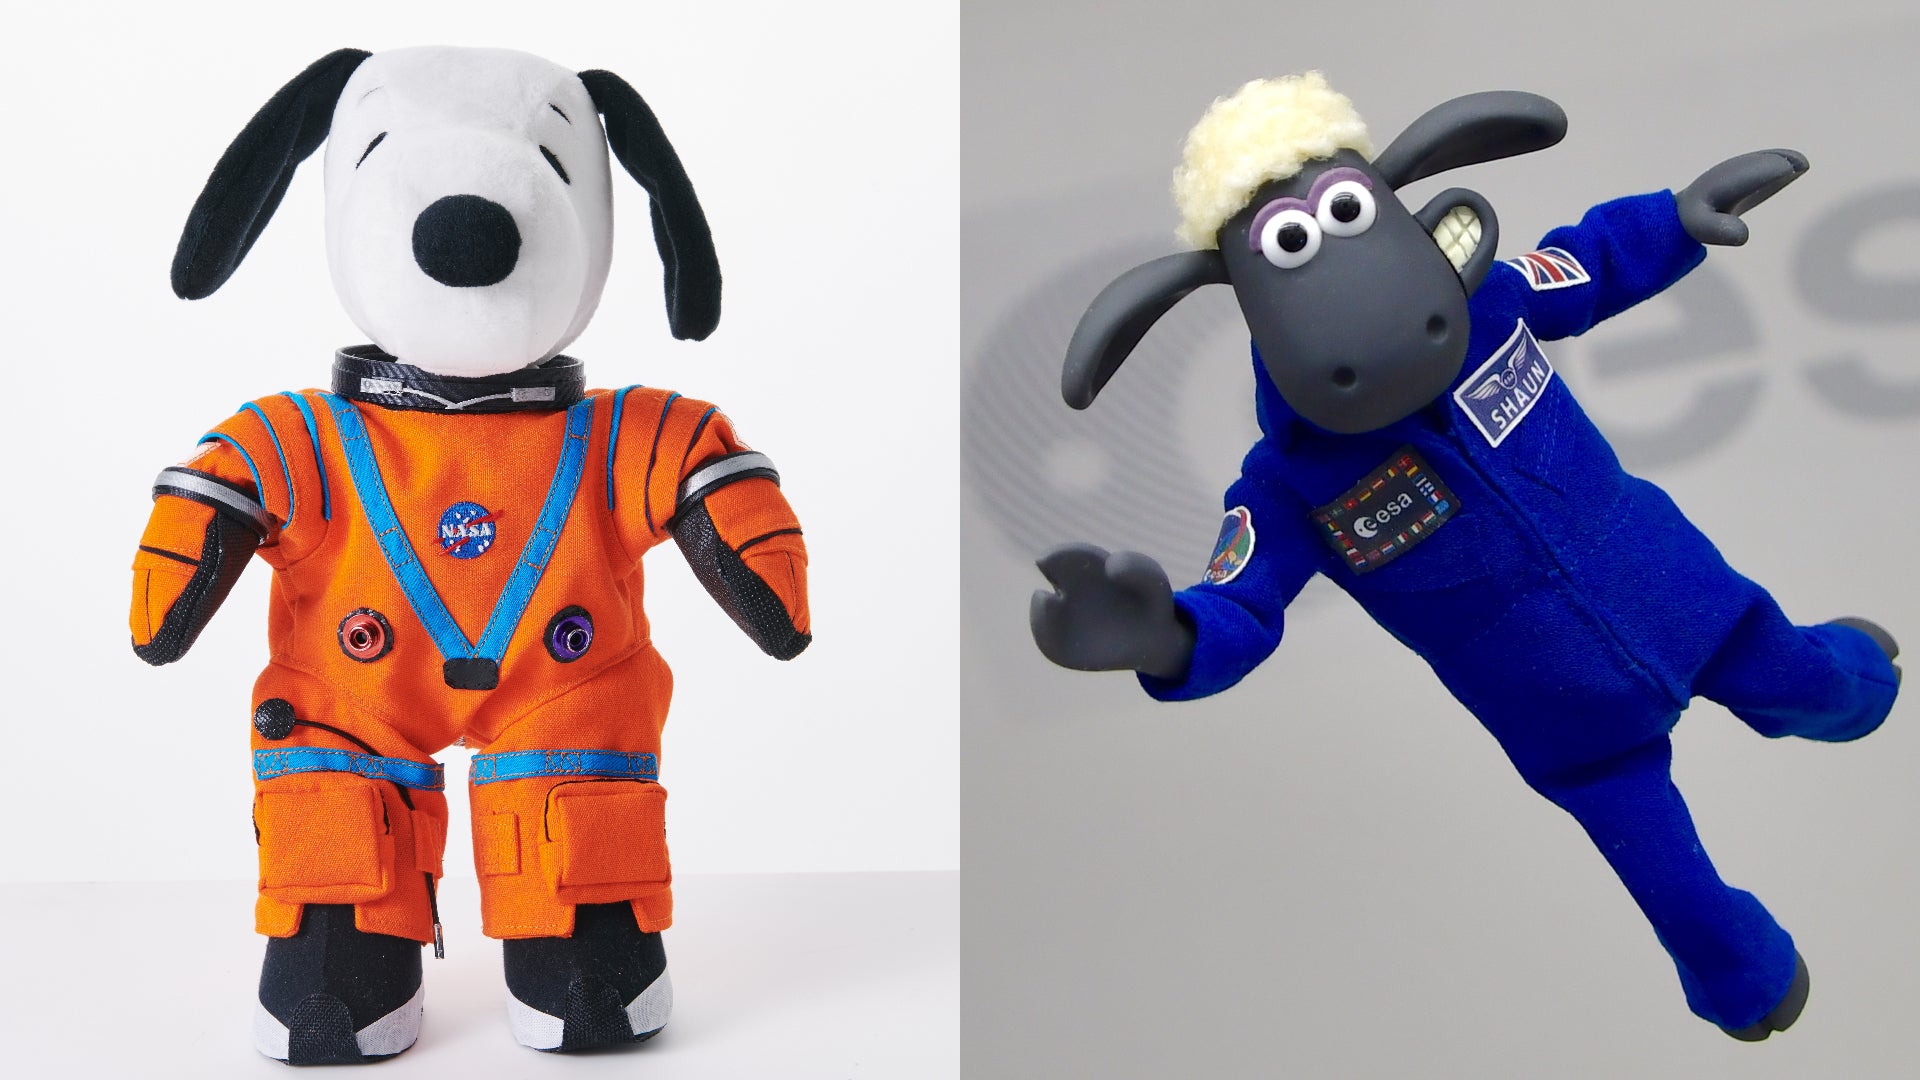 Left: Snoopy as a zero gravity indicator (NASA photo) Right: Shaun the Sheep on the special Airbus ‘Zero G’ A310 aircraft during one of its parabolic flights in 2019. (ESA Photo)